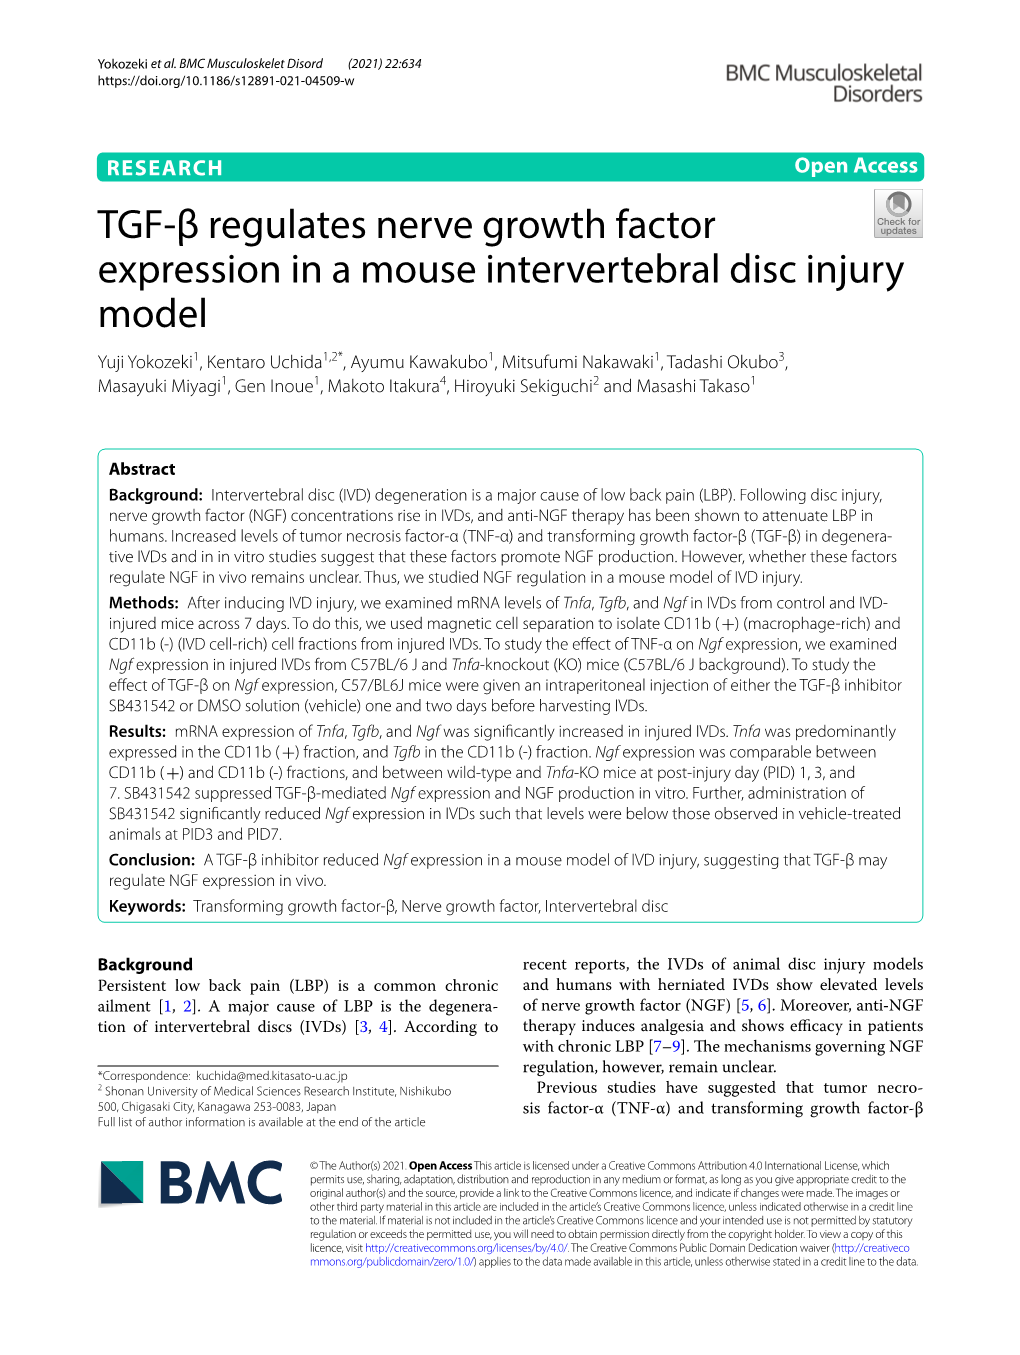 TGF-Β Regulates Nerve Growth Factor Expression in a Mouse